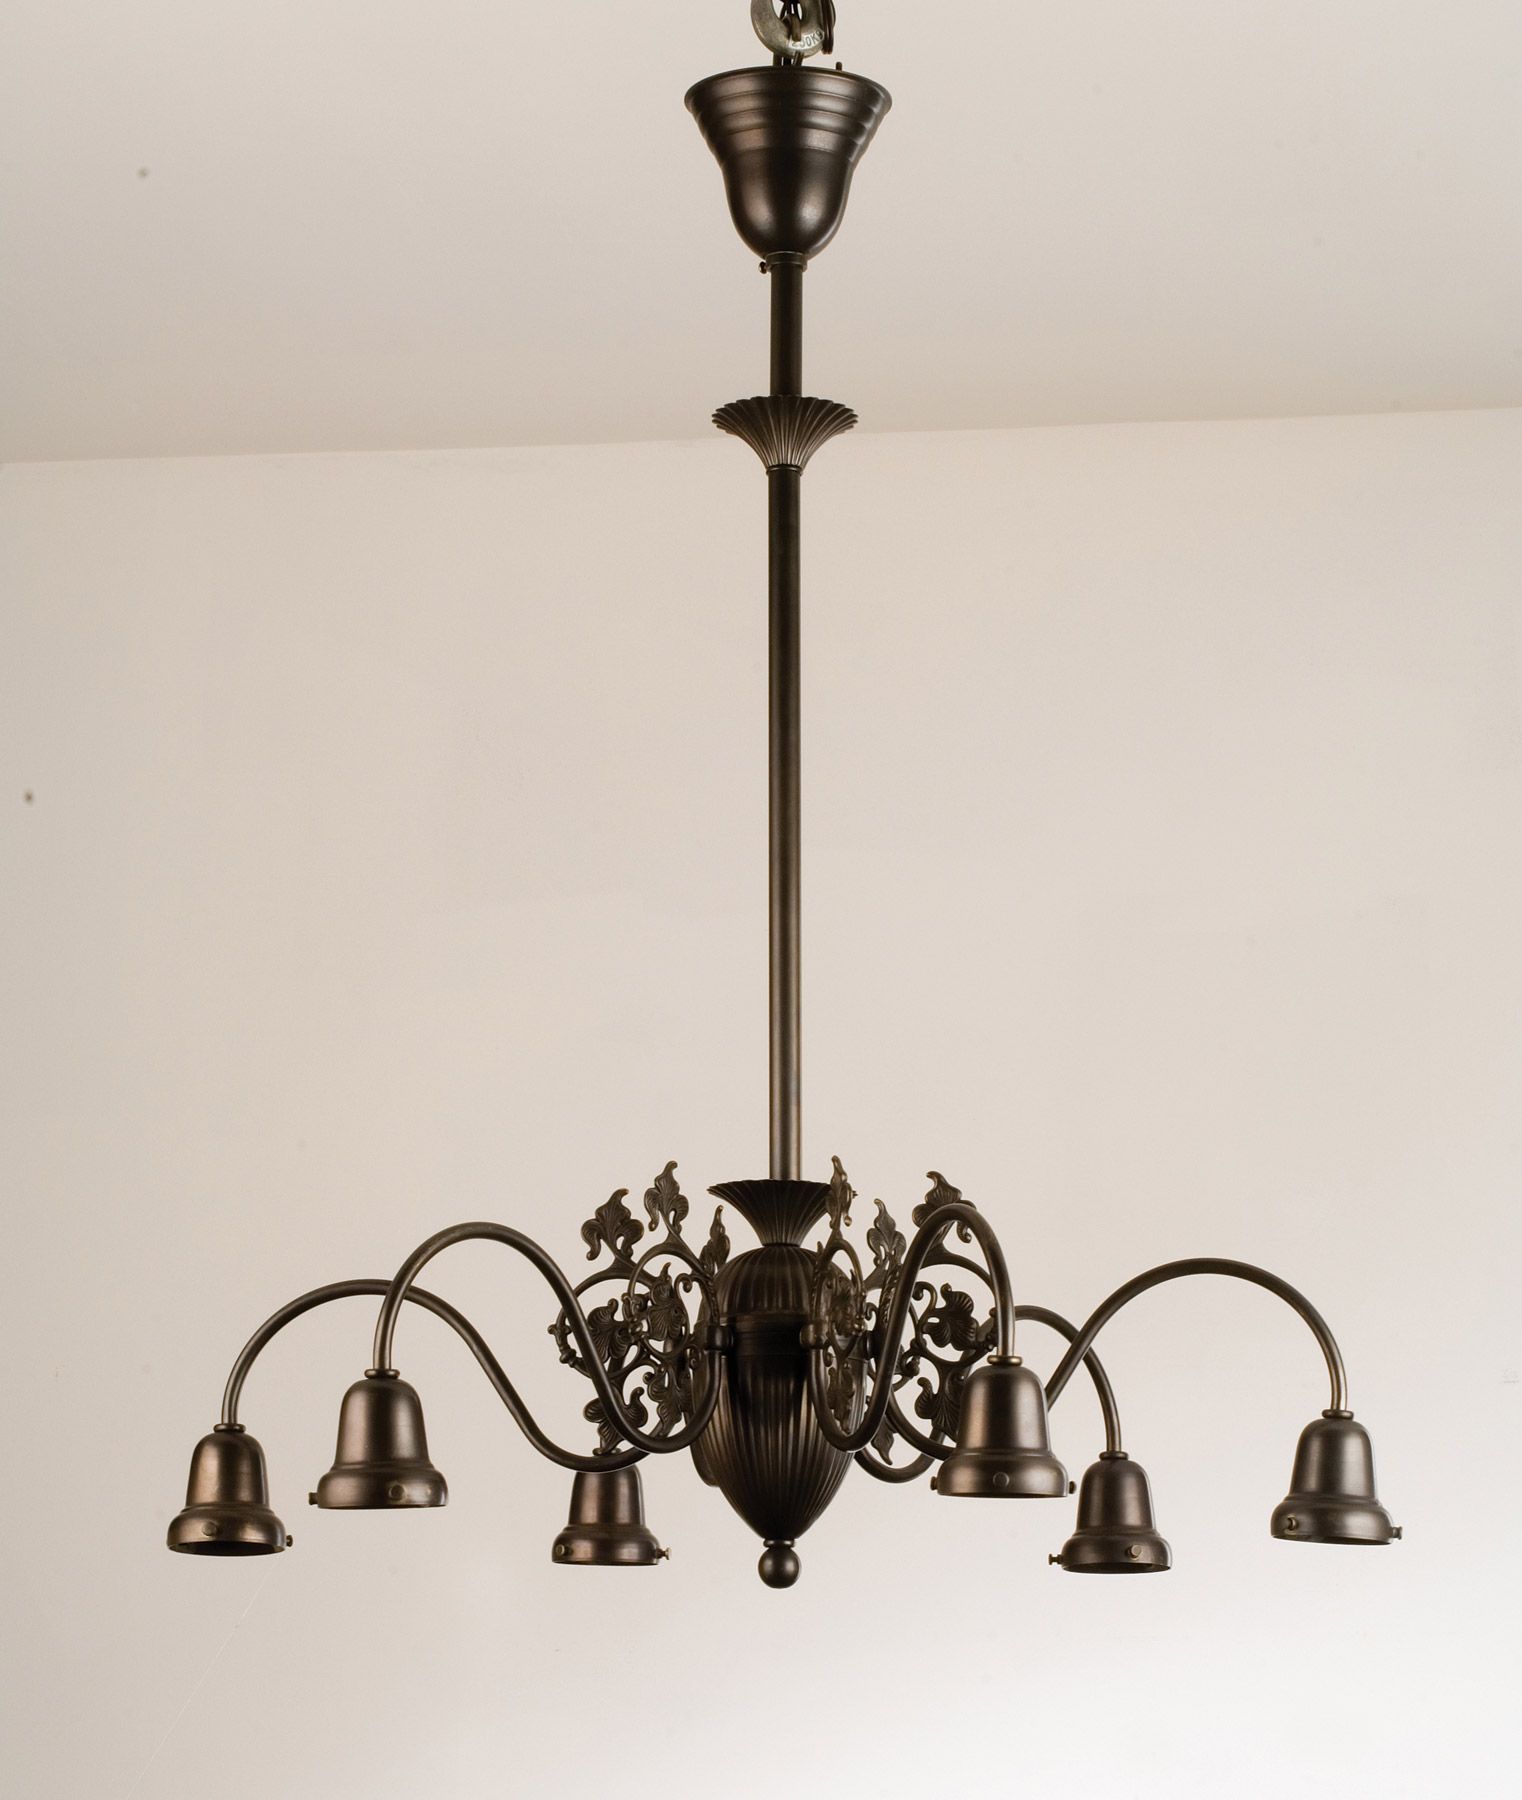 Meyda 101916 Six Light Chandelier Intended For Six Light Chandeliers (View 4 of 15)